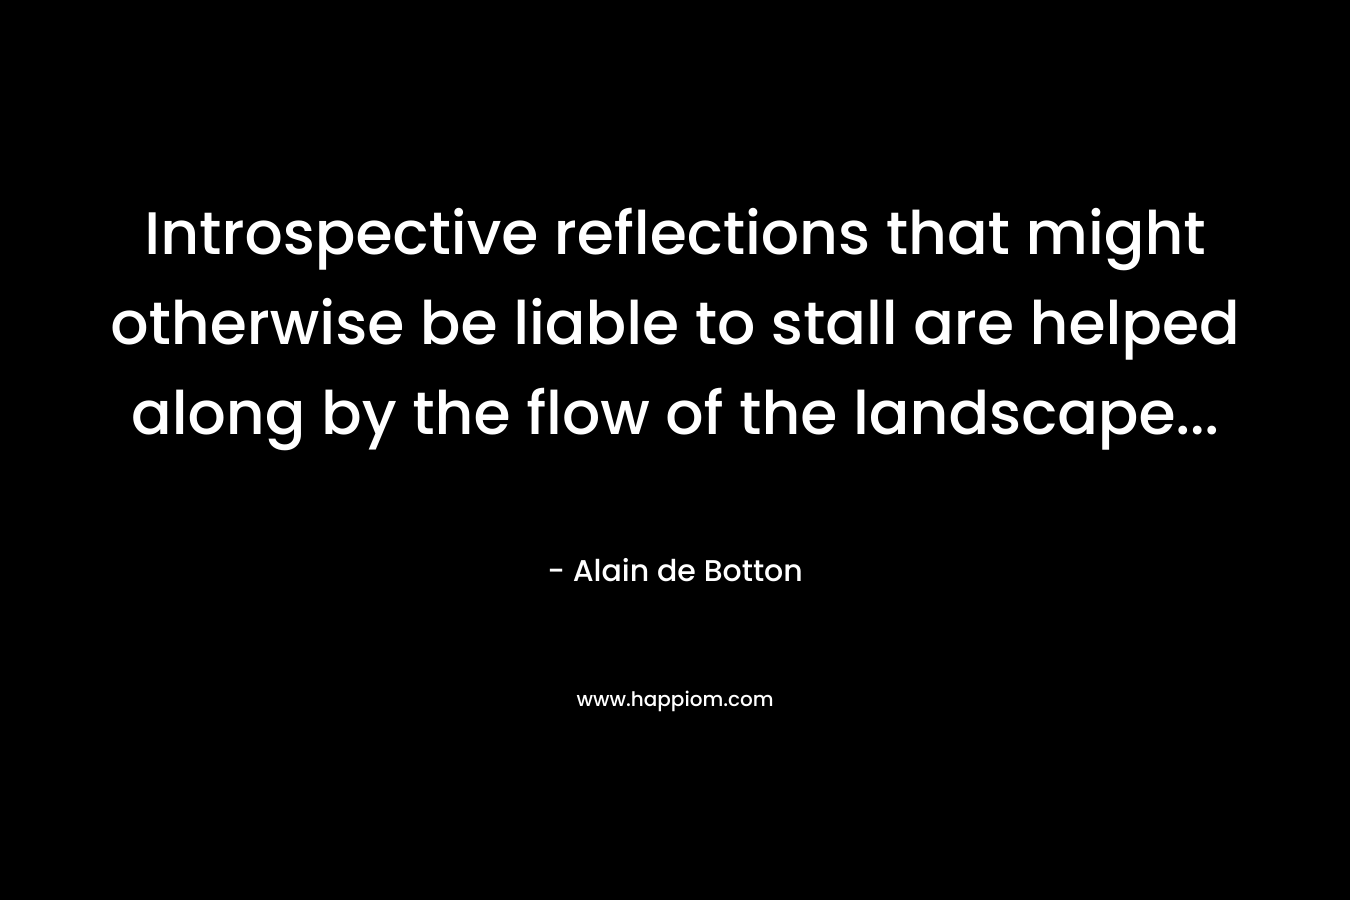 Introspective reflections that might otherwise be liable to stall are helped along by the flow of the landscape… – Alain de Botton